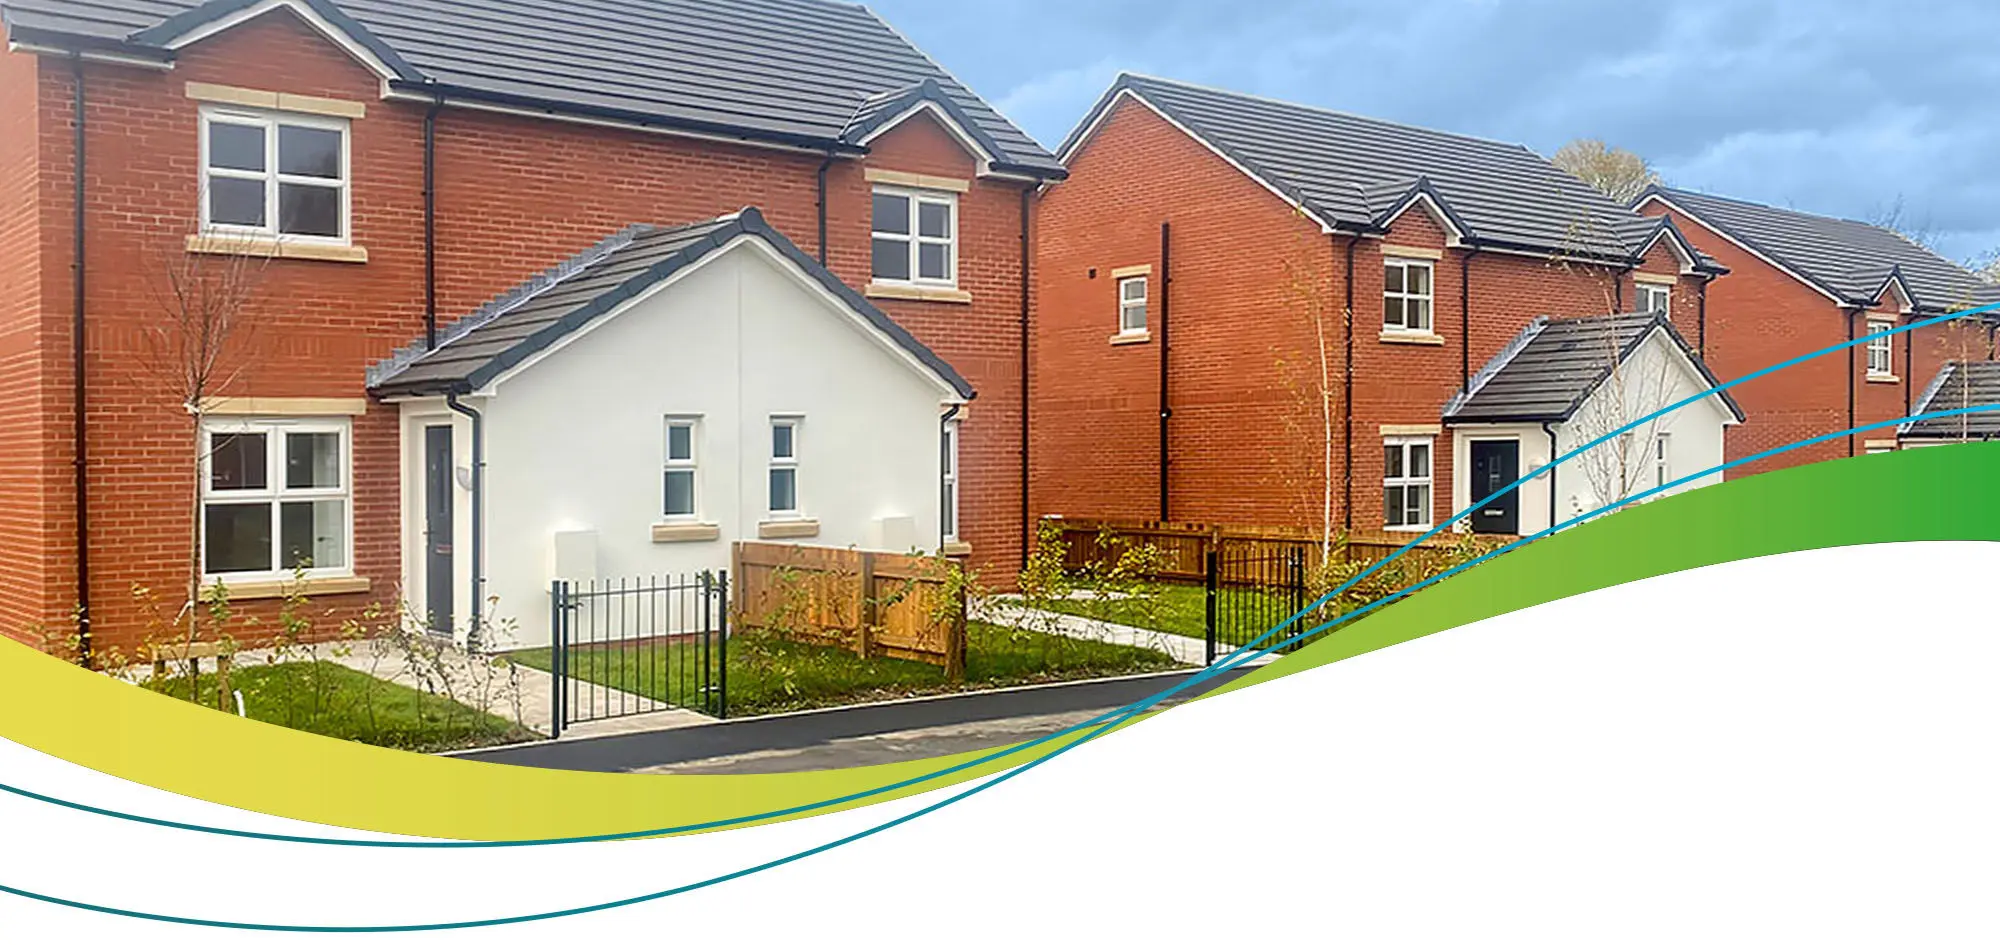 West Lancashire affordable housing Tawd Valley